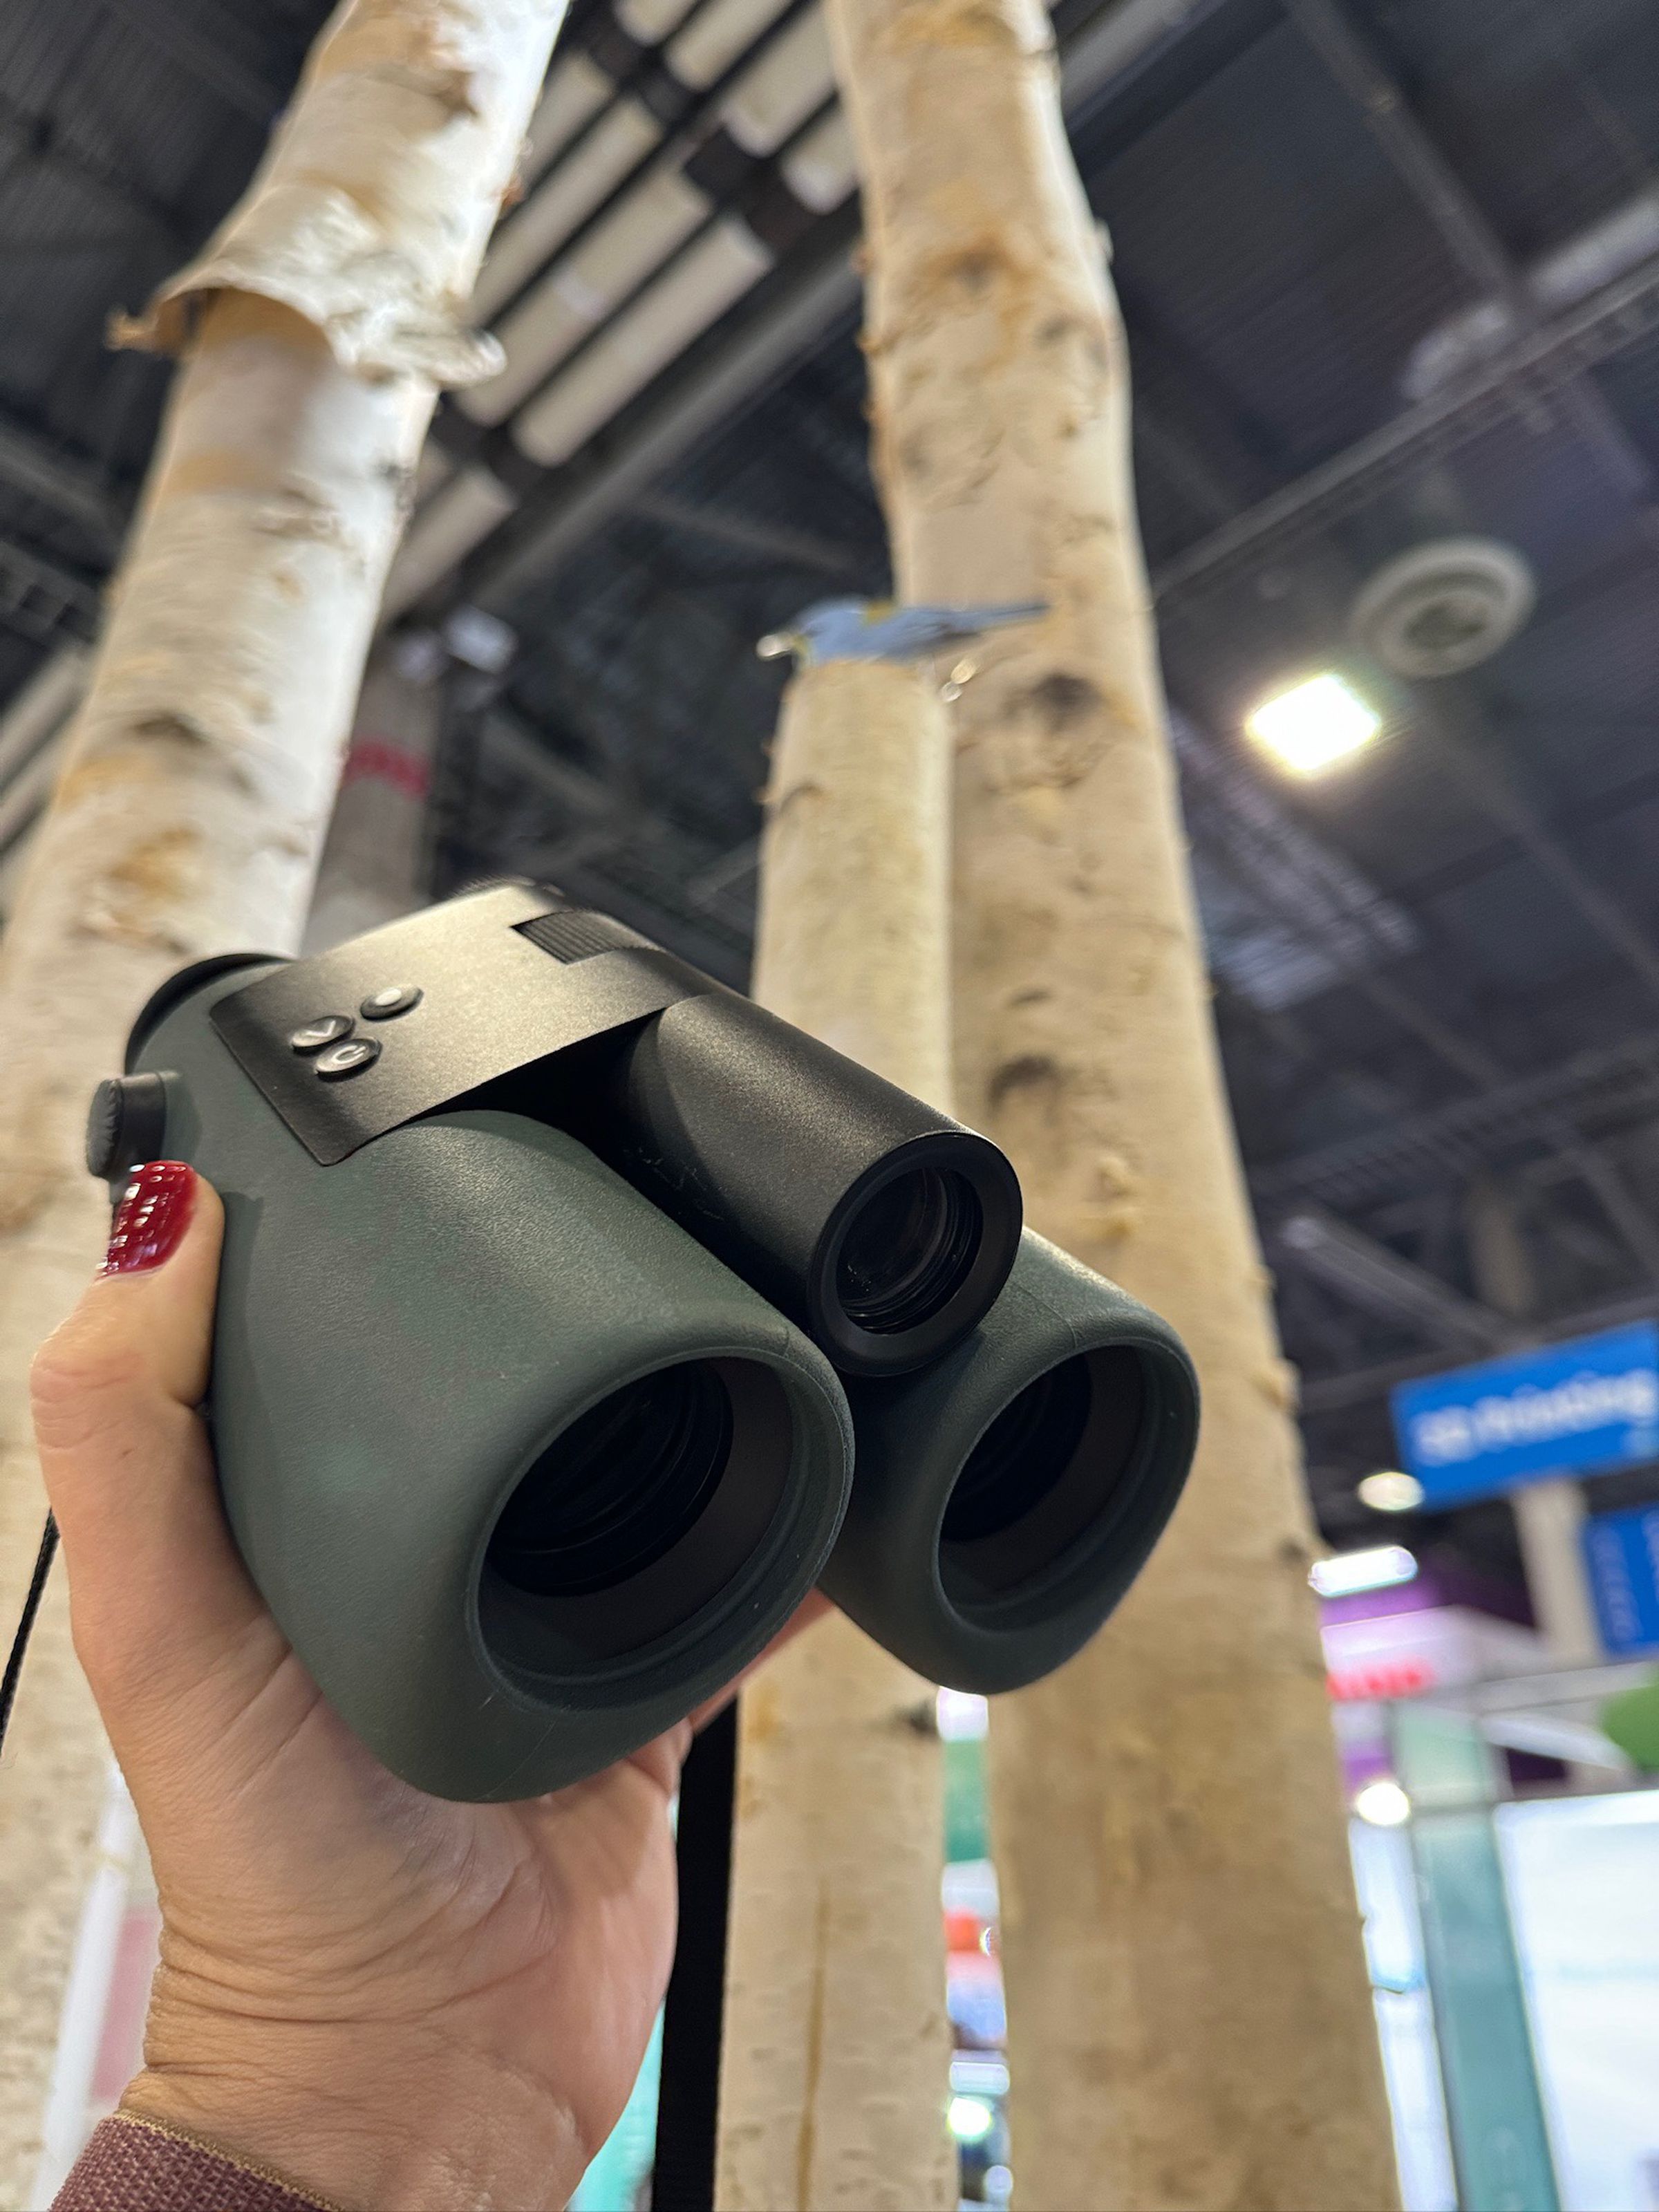 The AX Visio smart binoculars can identify over 9,000 species of birds and mammals for you. 